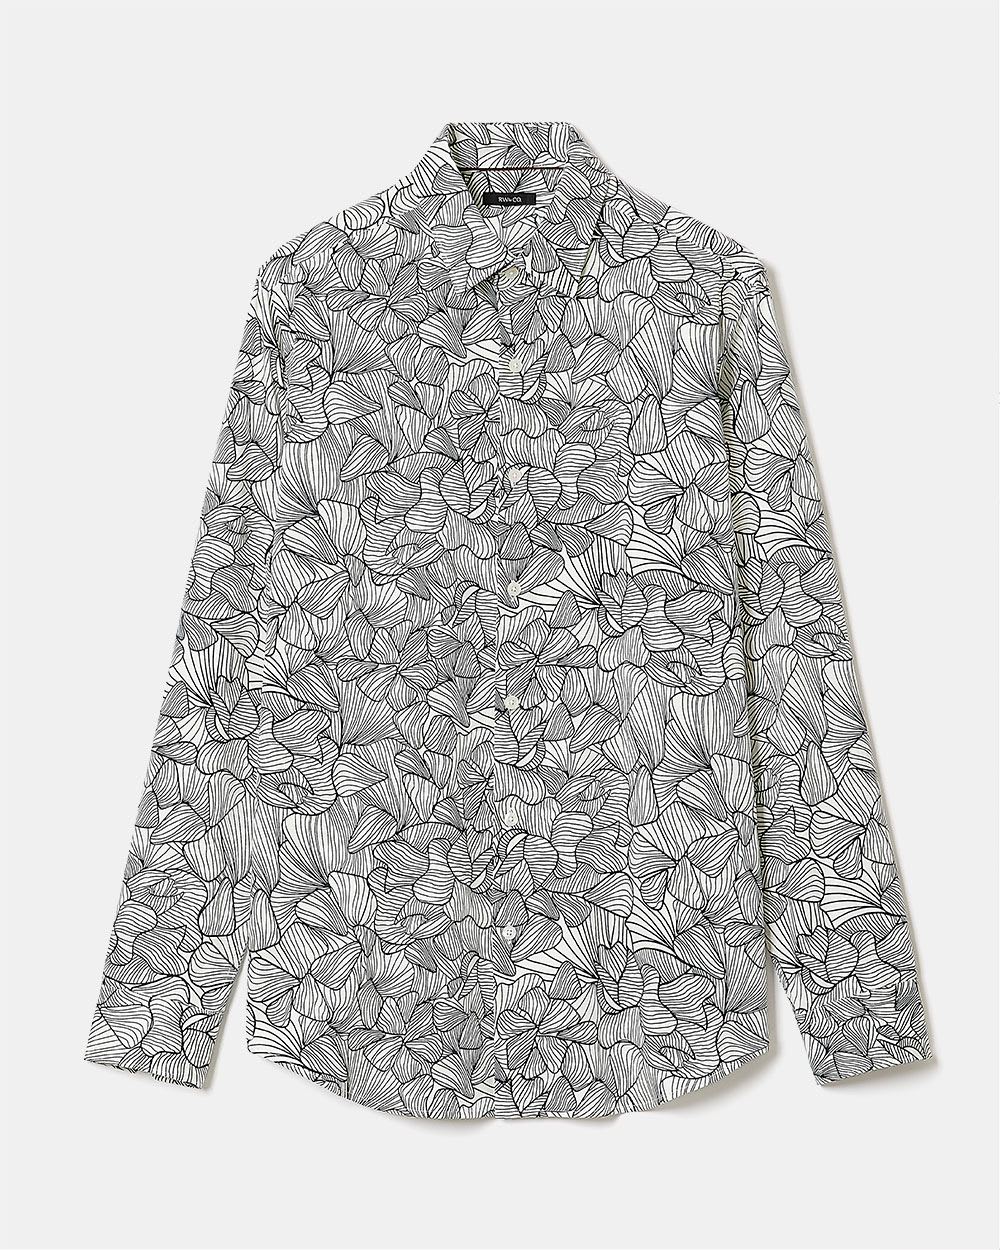 Tailored-Fit Dress Shirt with Floral Pattern | RW&CO.